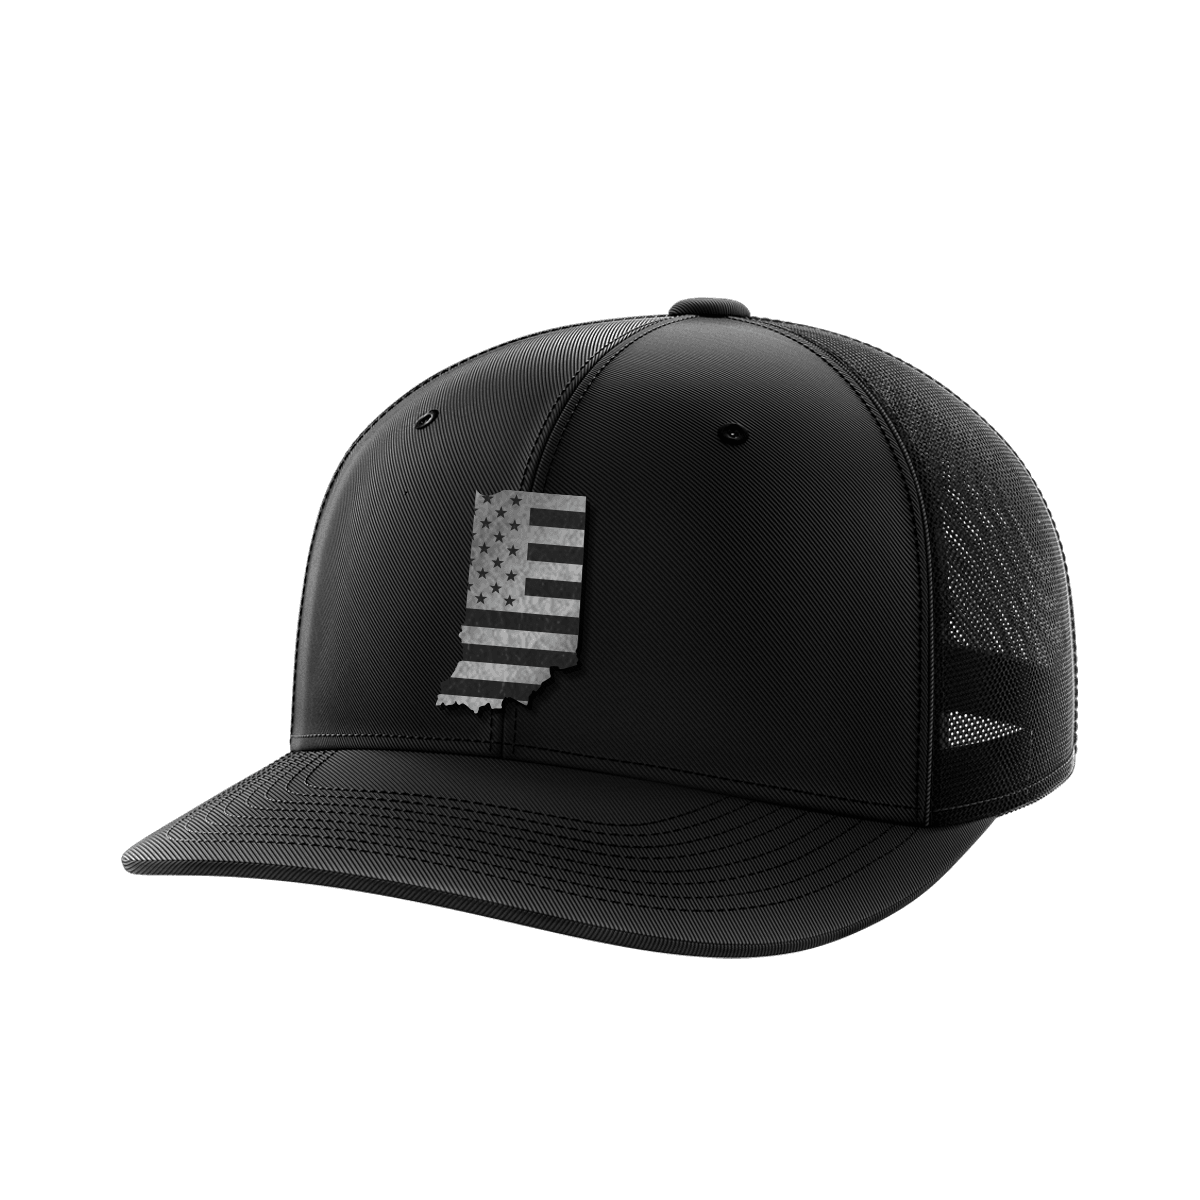 Indiana United Collection (black leather) - Greater Half